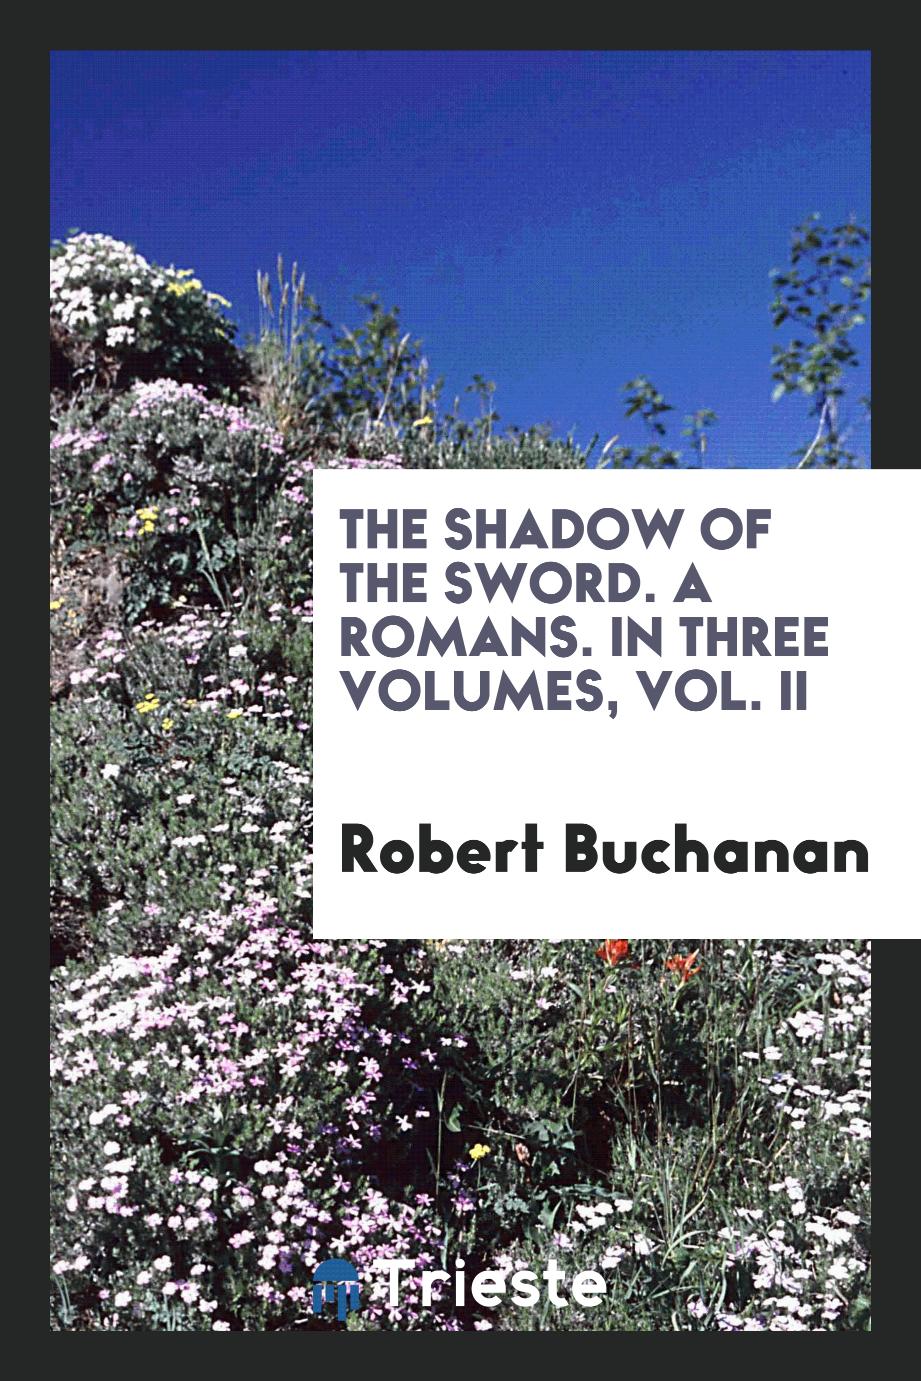 The Shadow of the Sword. A Romans. In Three Volumes, Vol. II